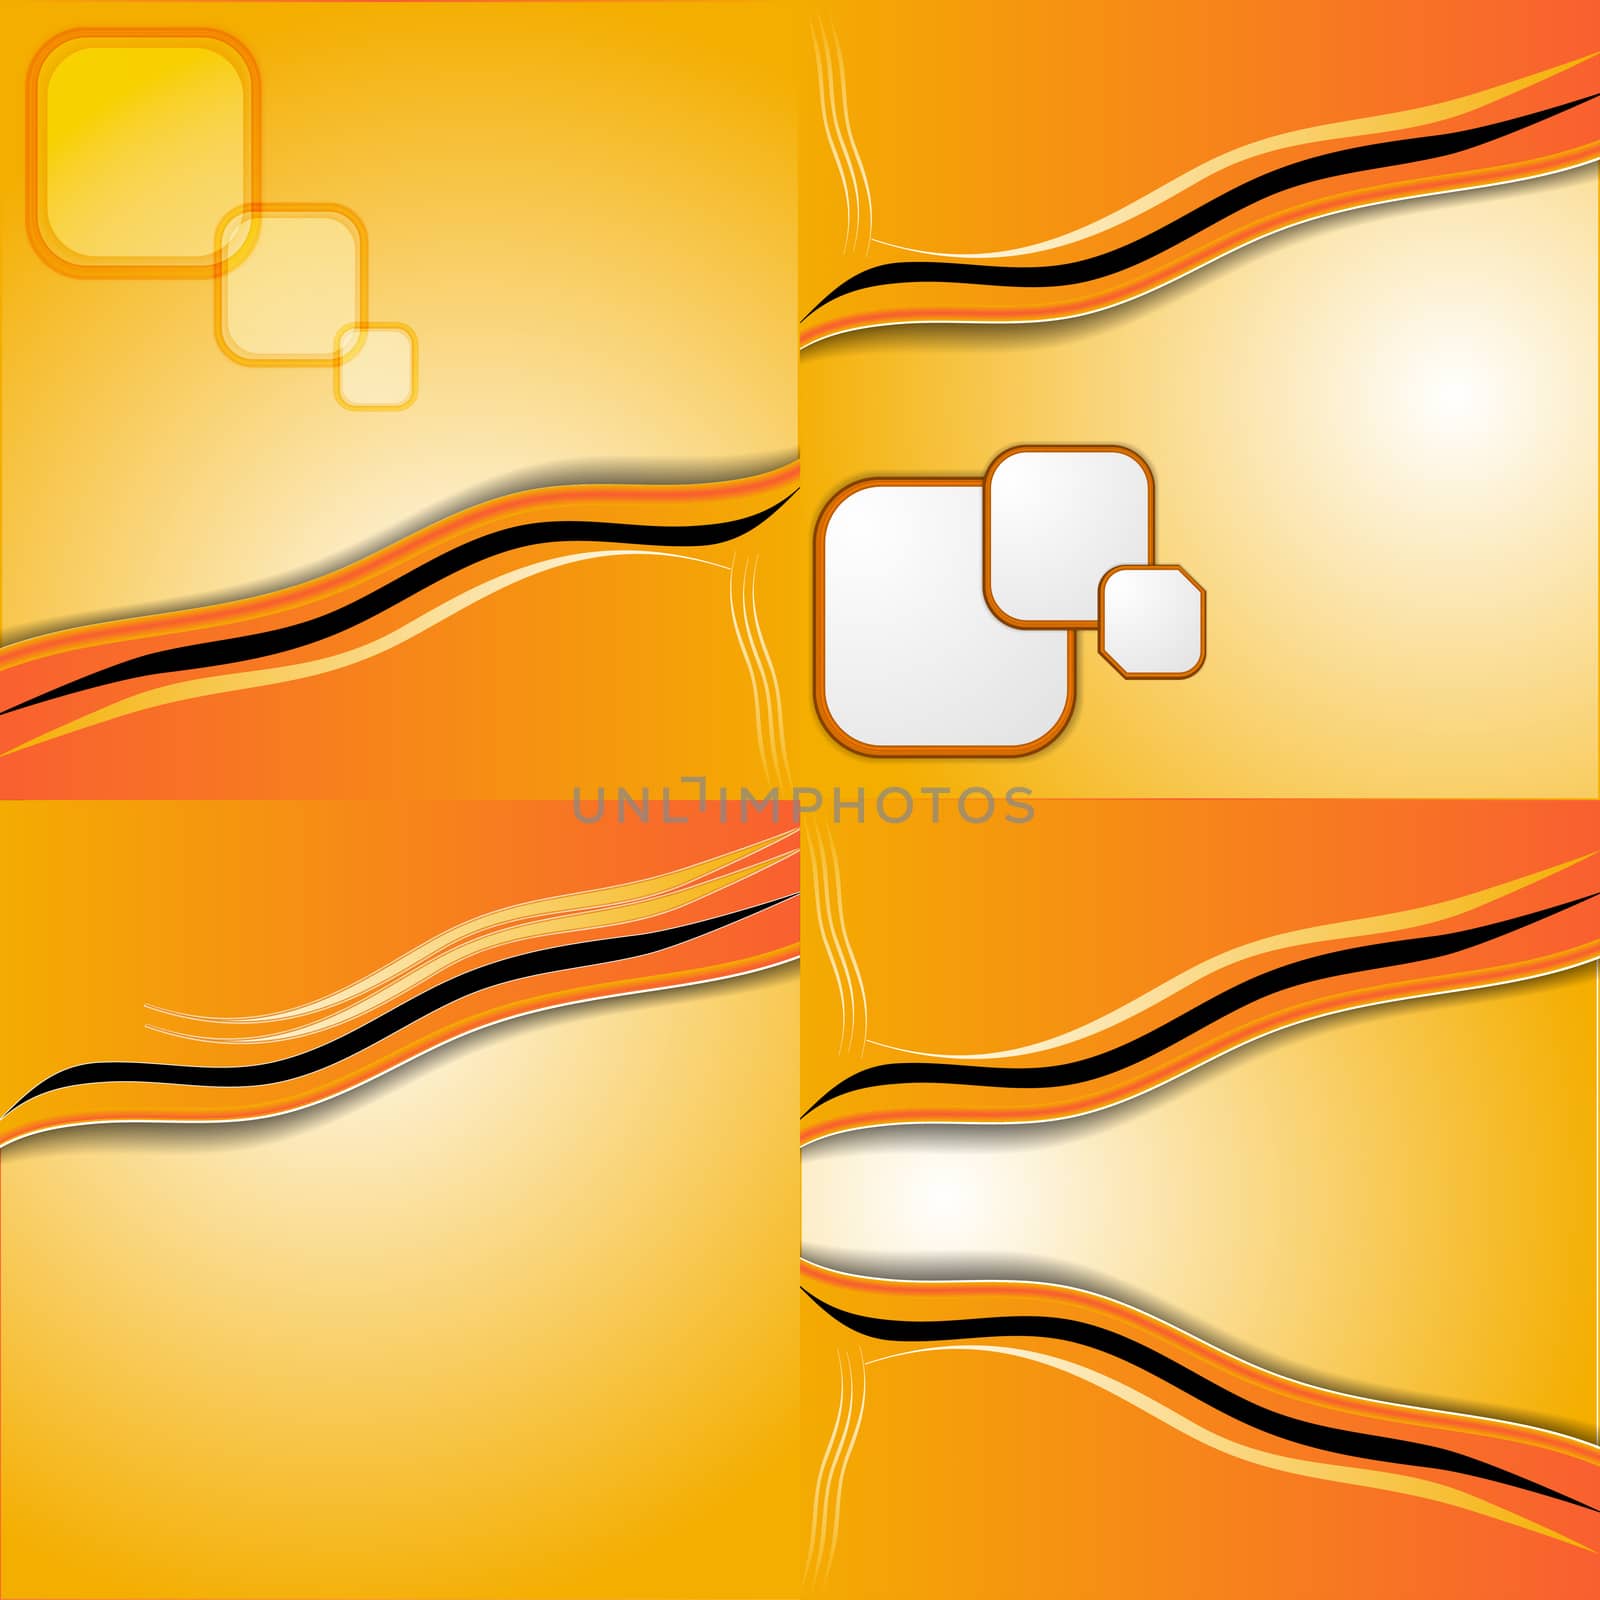 Set of 4 orange backgrounds with place for your text. Raster copy.